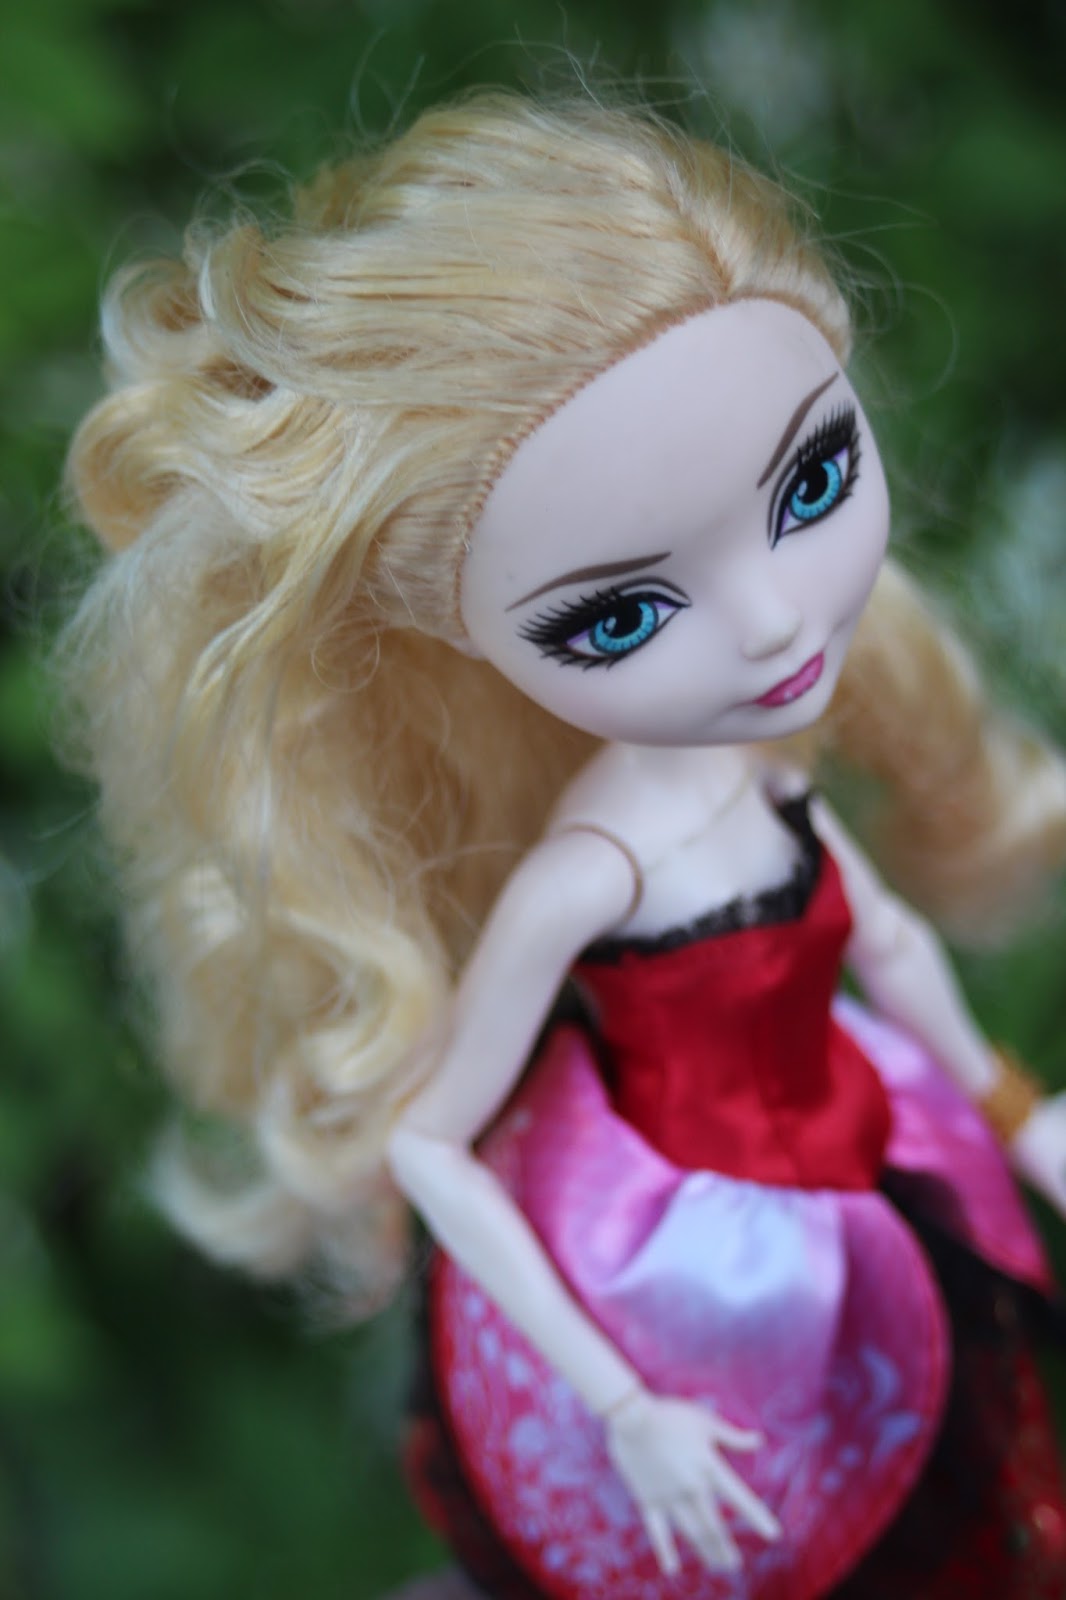 PLANET OF THE DOLLS: Doll-A-Day 2017 #130: Ever After High Apple